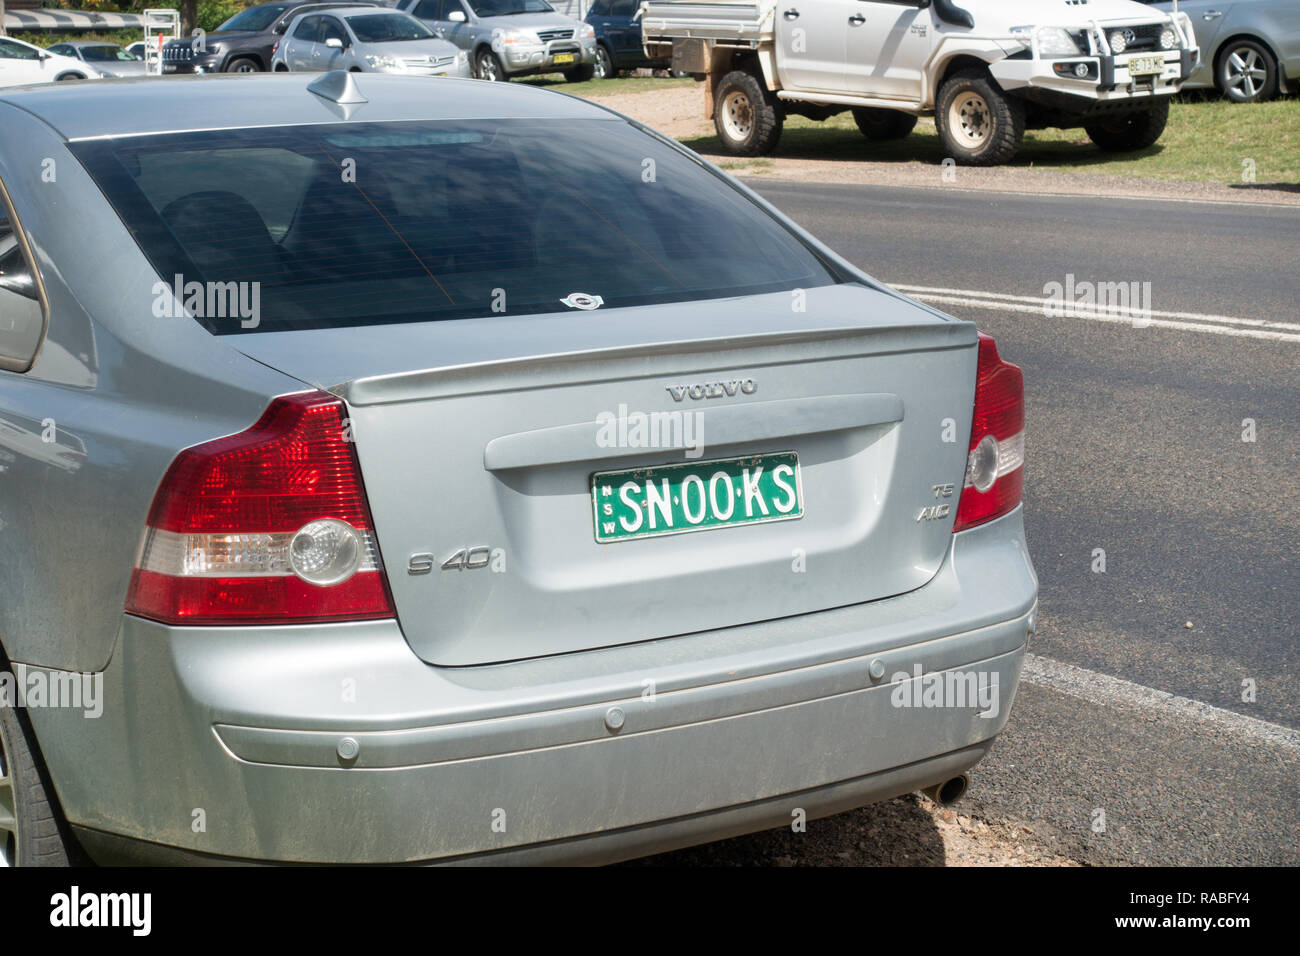 cheap personalized license plates